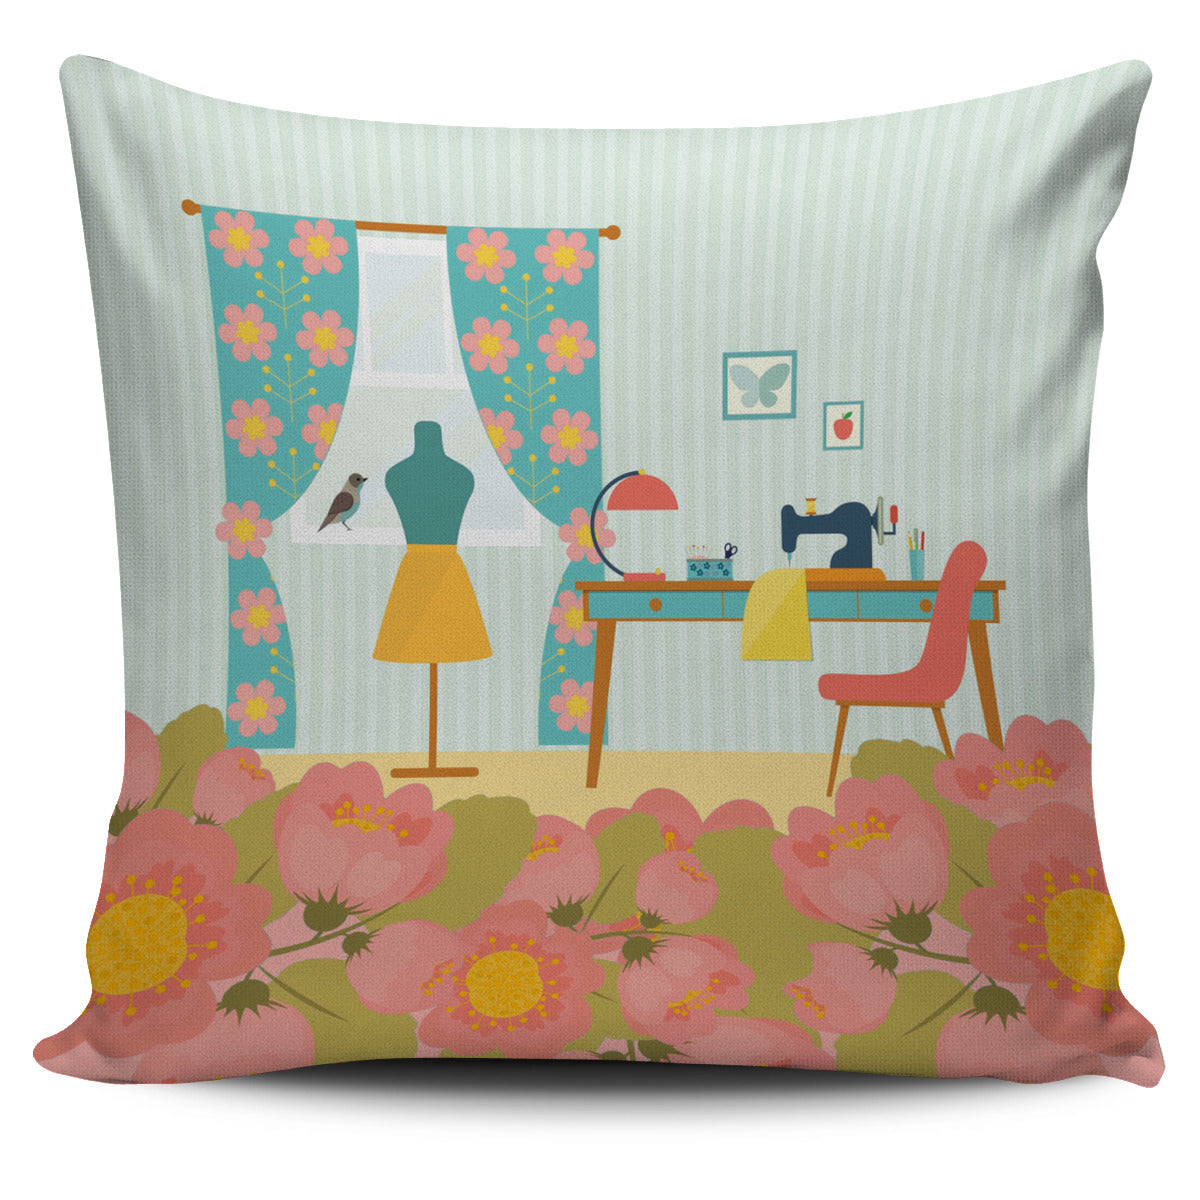 Adorable Sewing Nook Pillow Cover